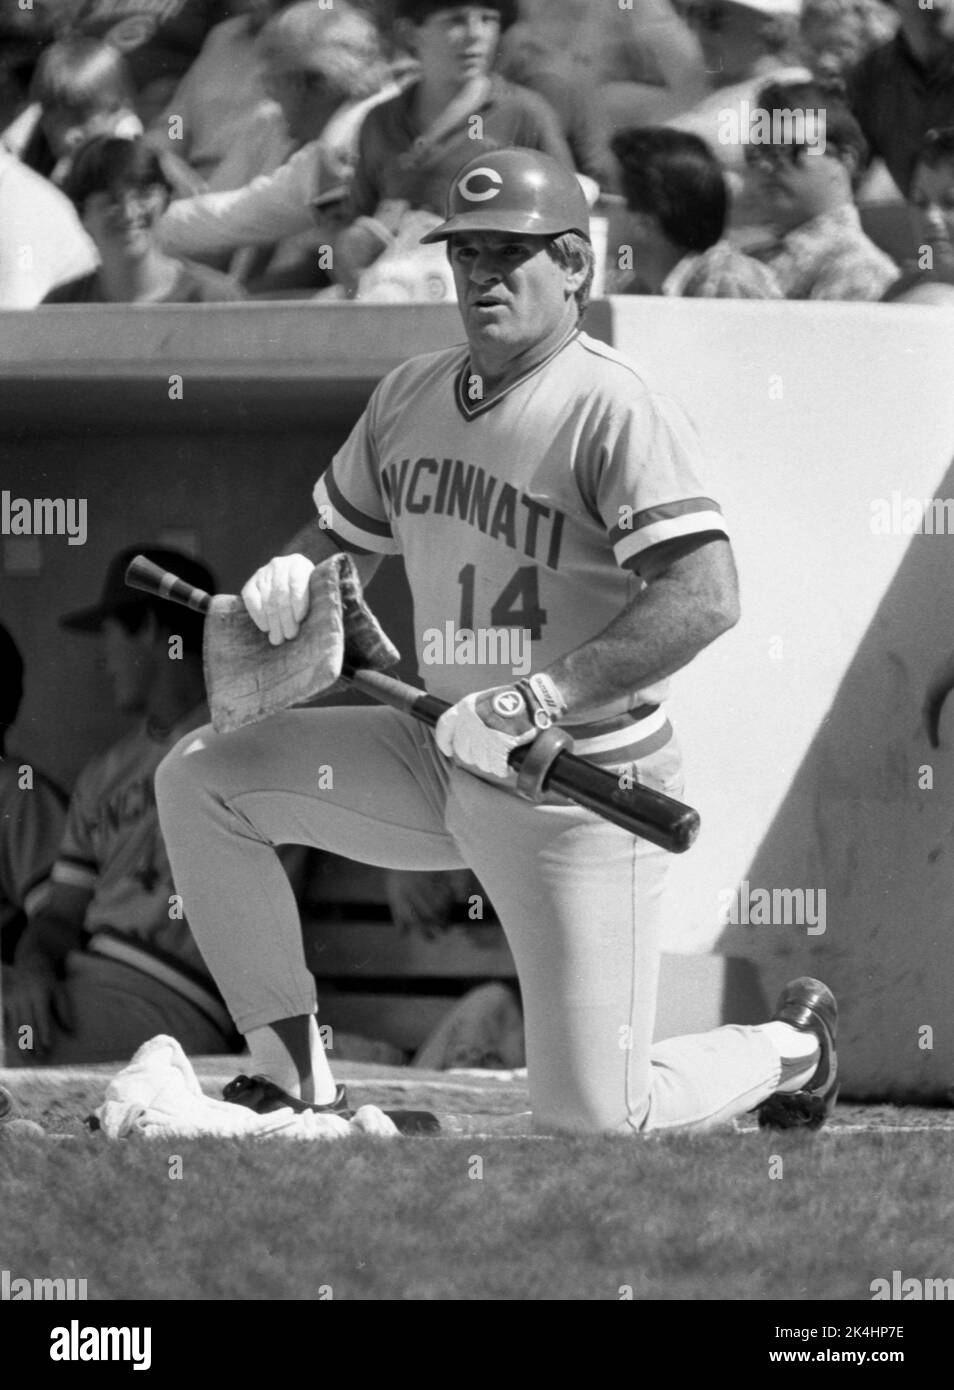 Pete Rose, player and manager of the Cincinnati Reds, is shown during game action at Wrigley Field in Chicago, ca. 1985 Stock Photo